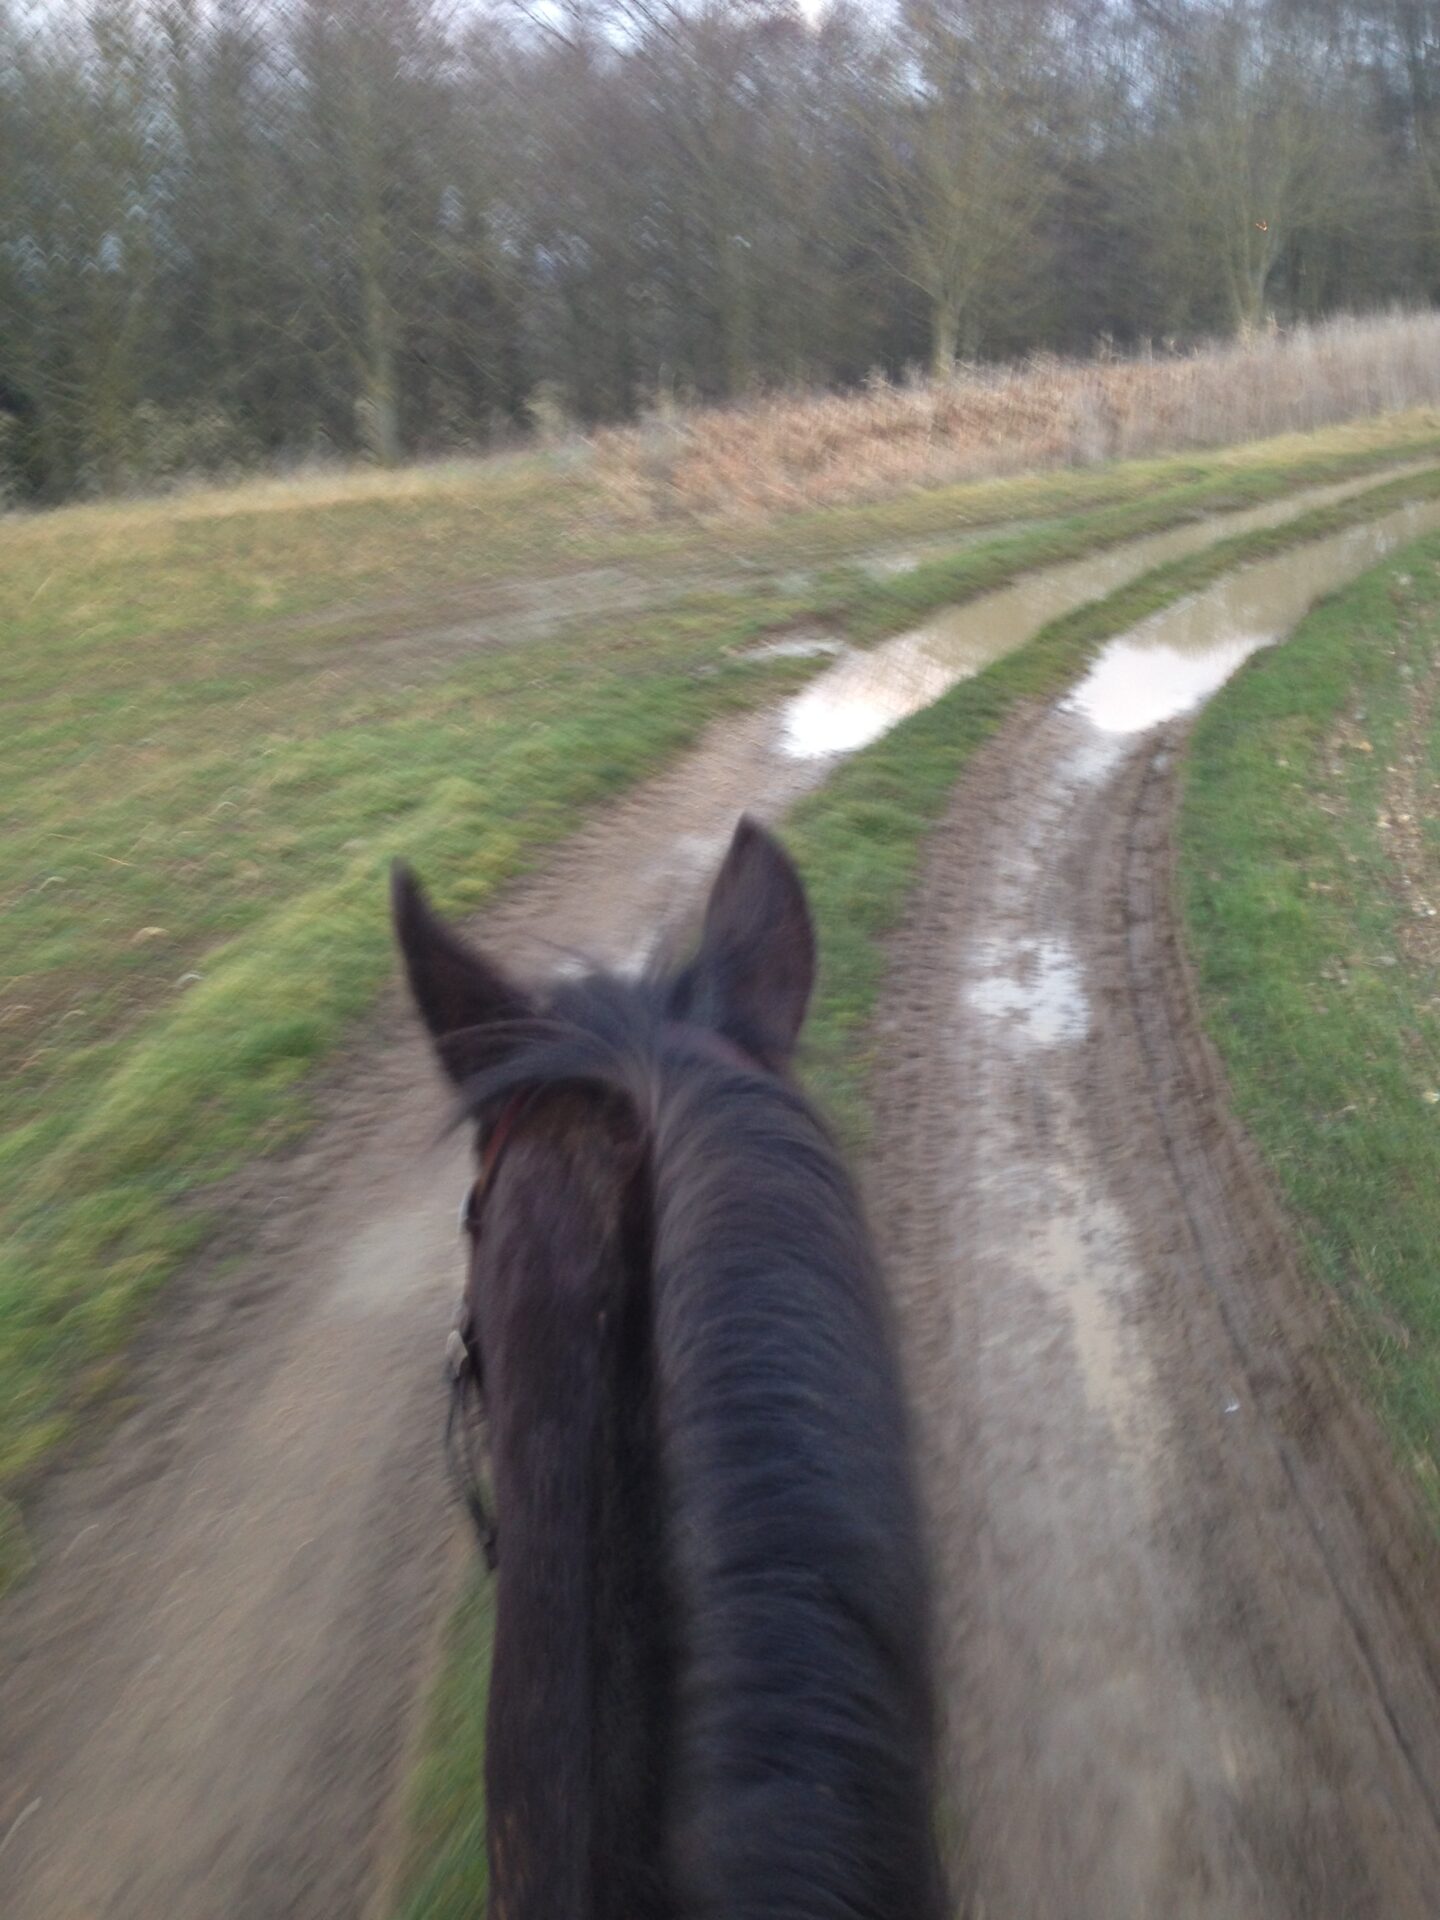 An early spring hack and a slice of sanity